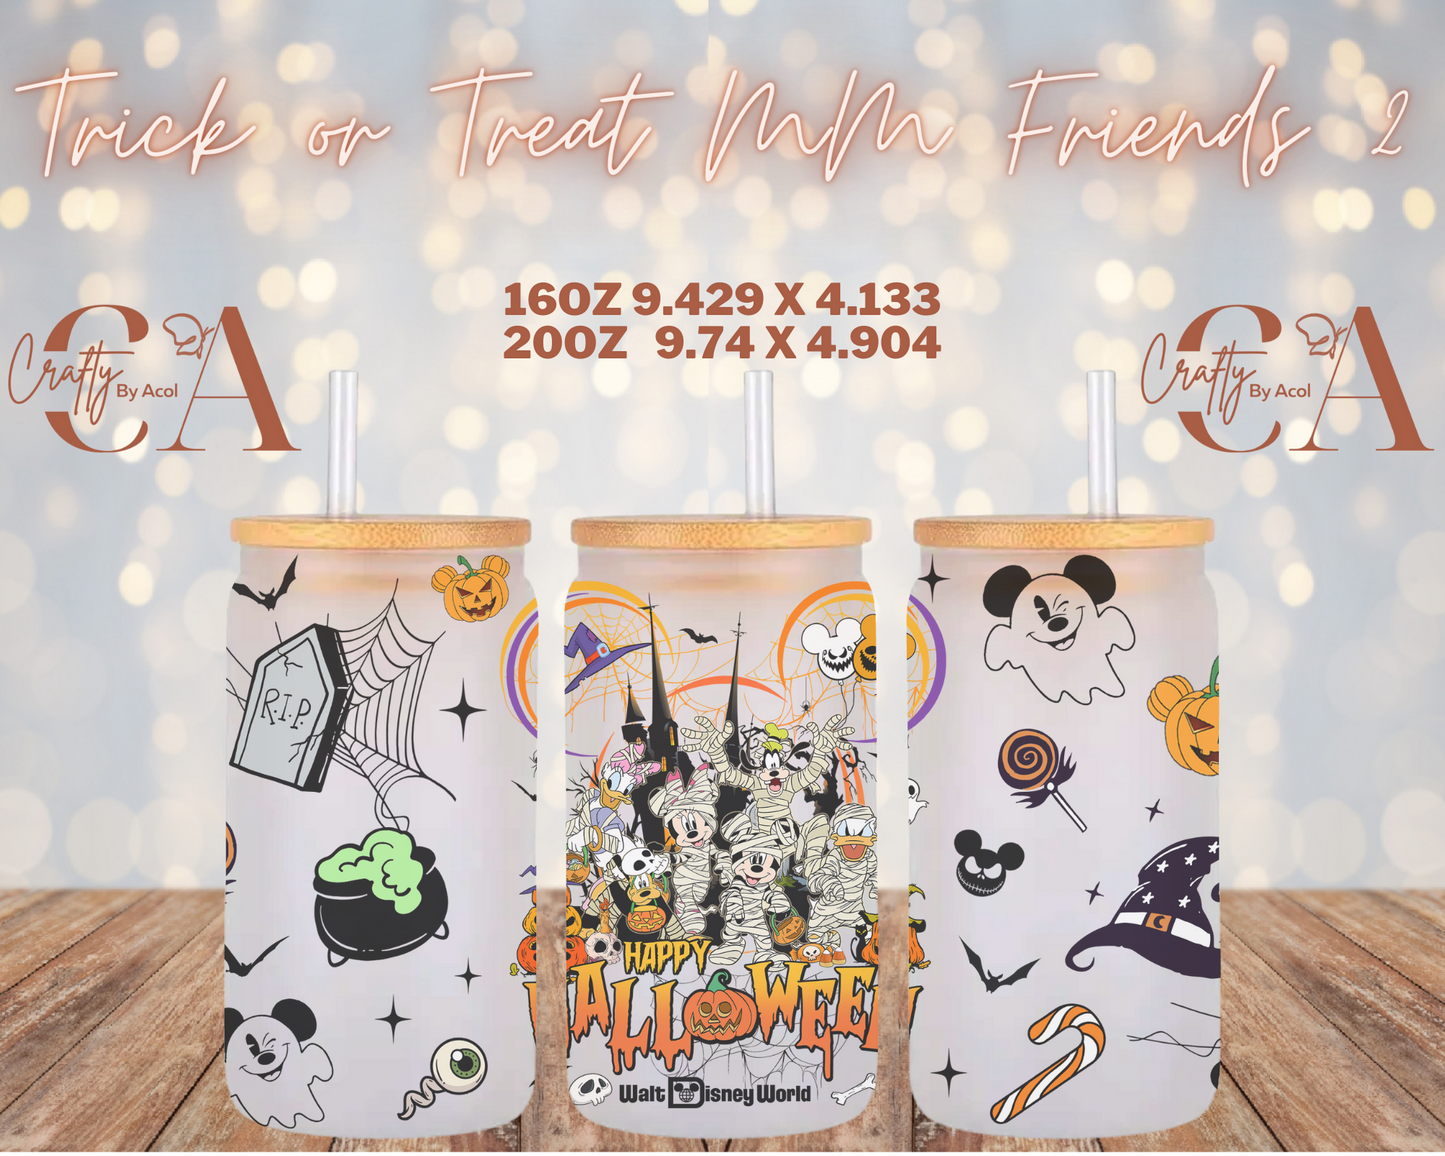 Trick Or Treat MM Friends 2 Vinyl Can Wrap